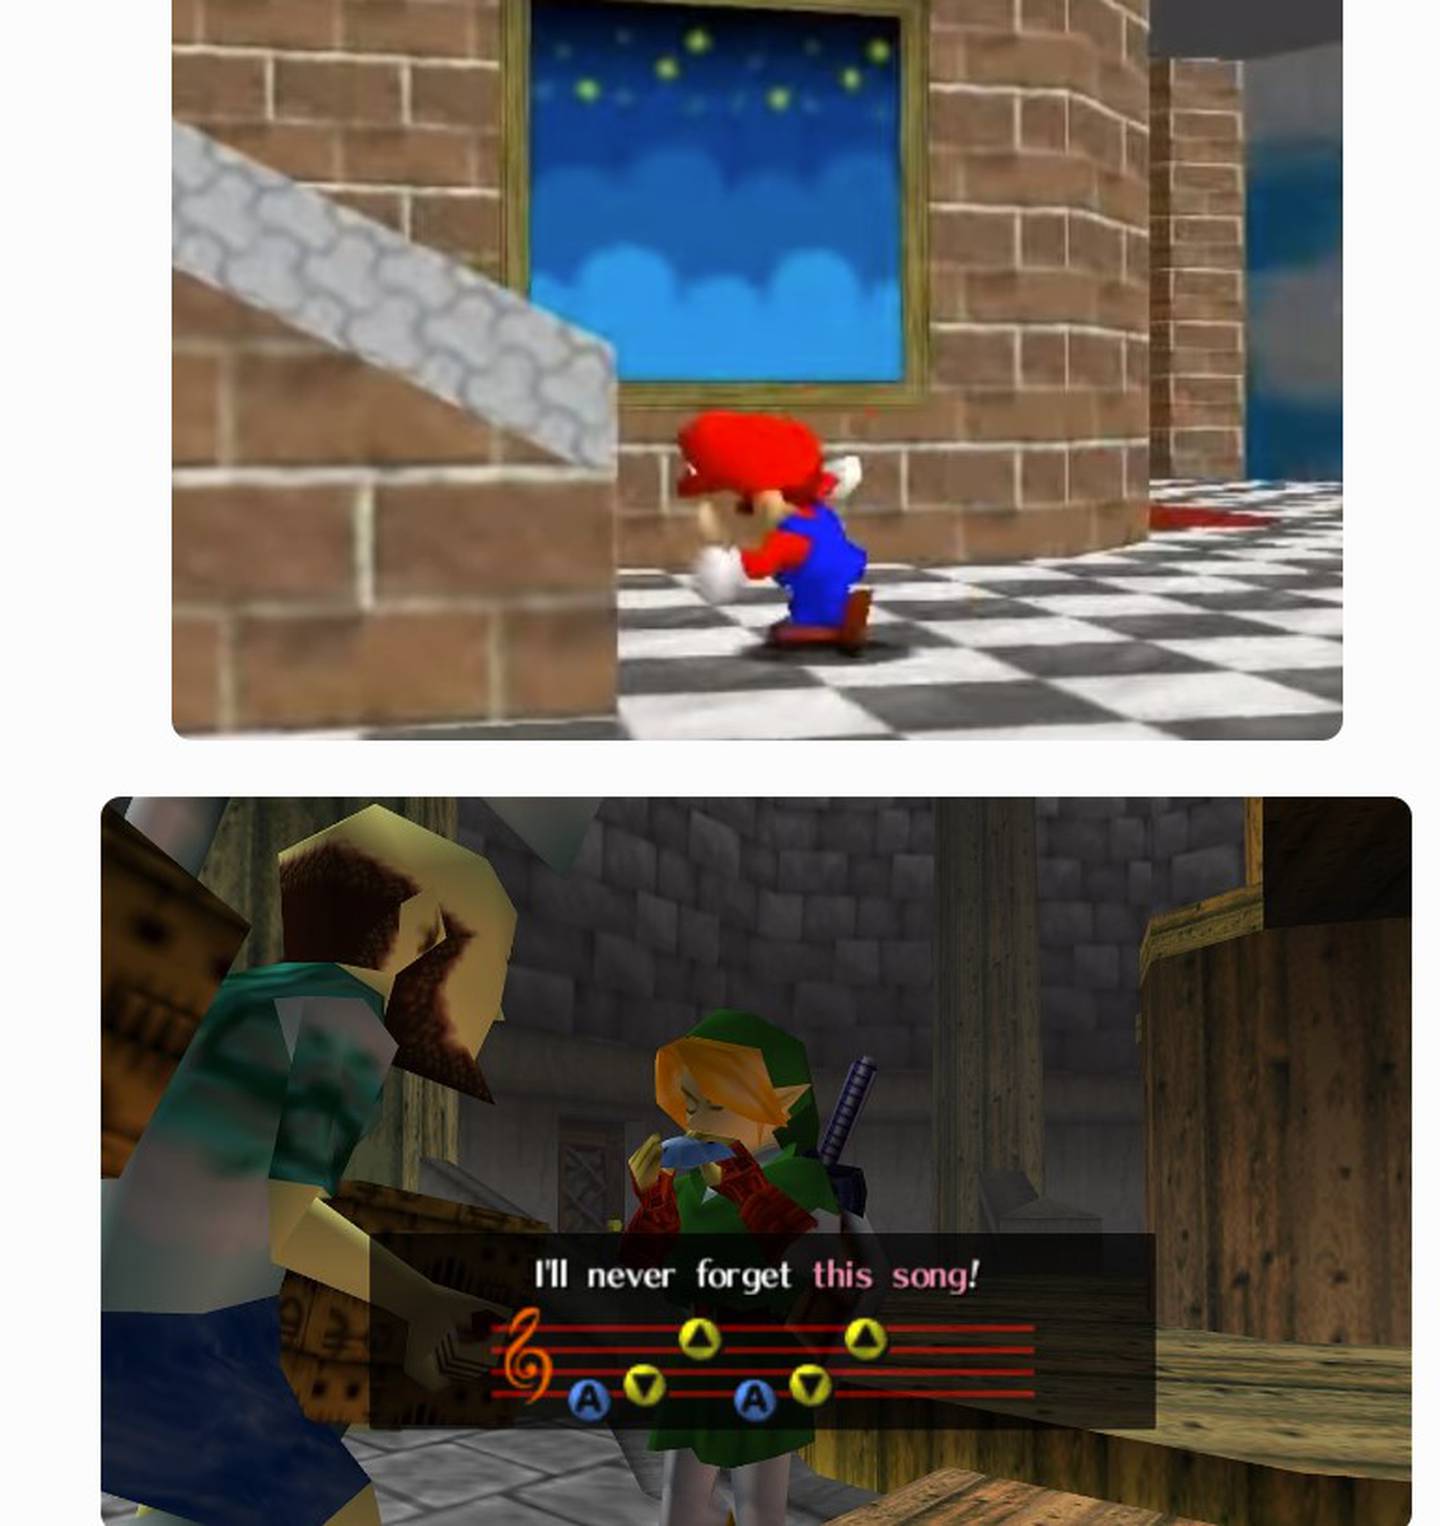 Ocarina of Time Easter egg in Mario 64